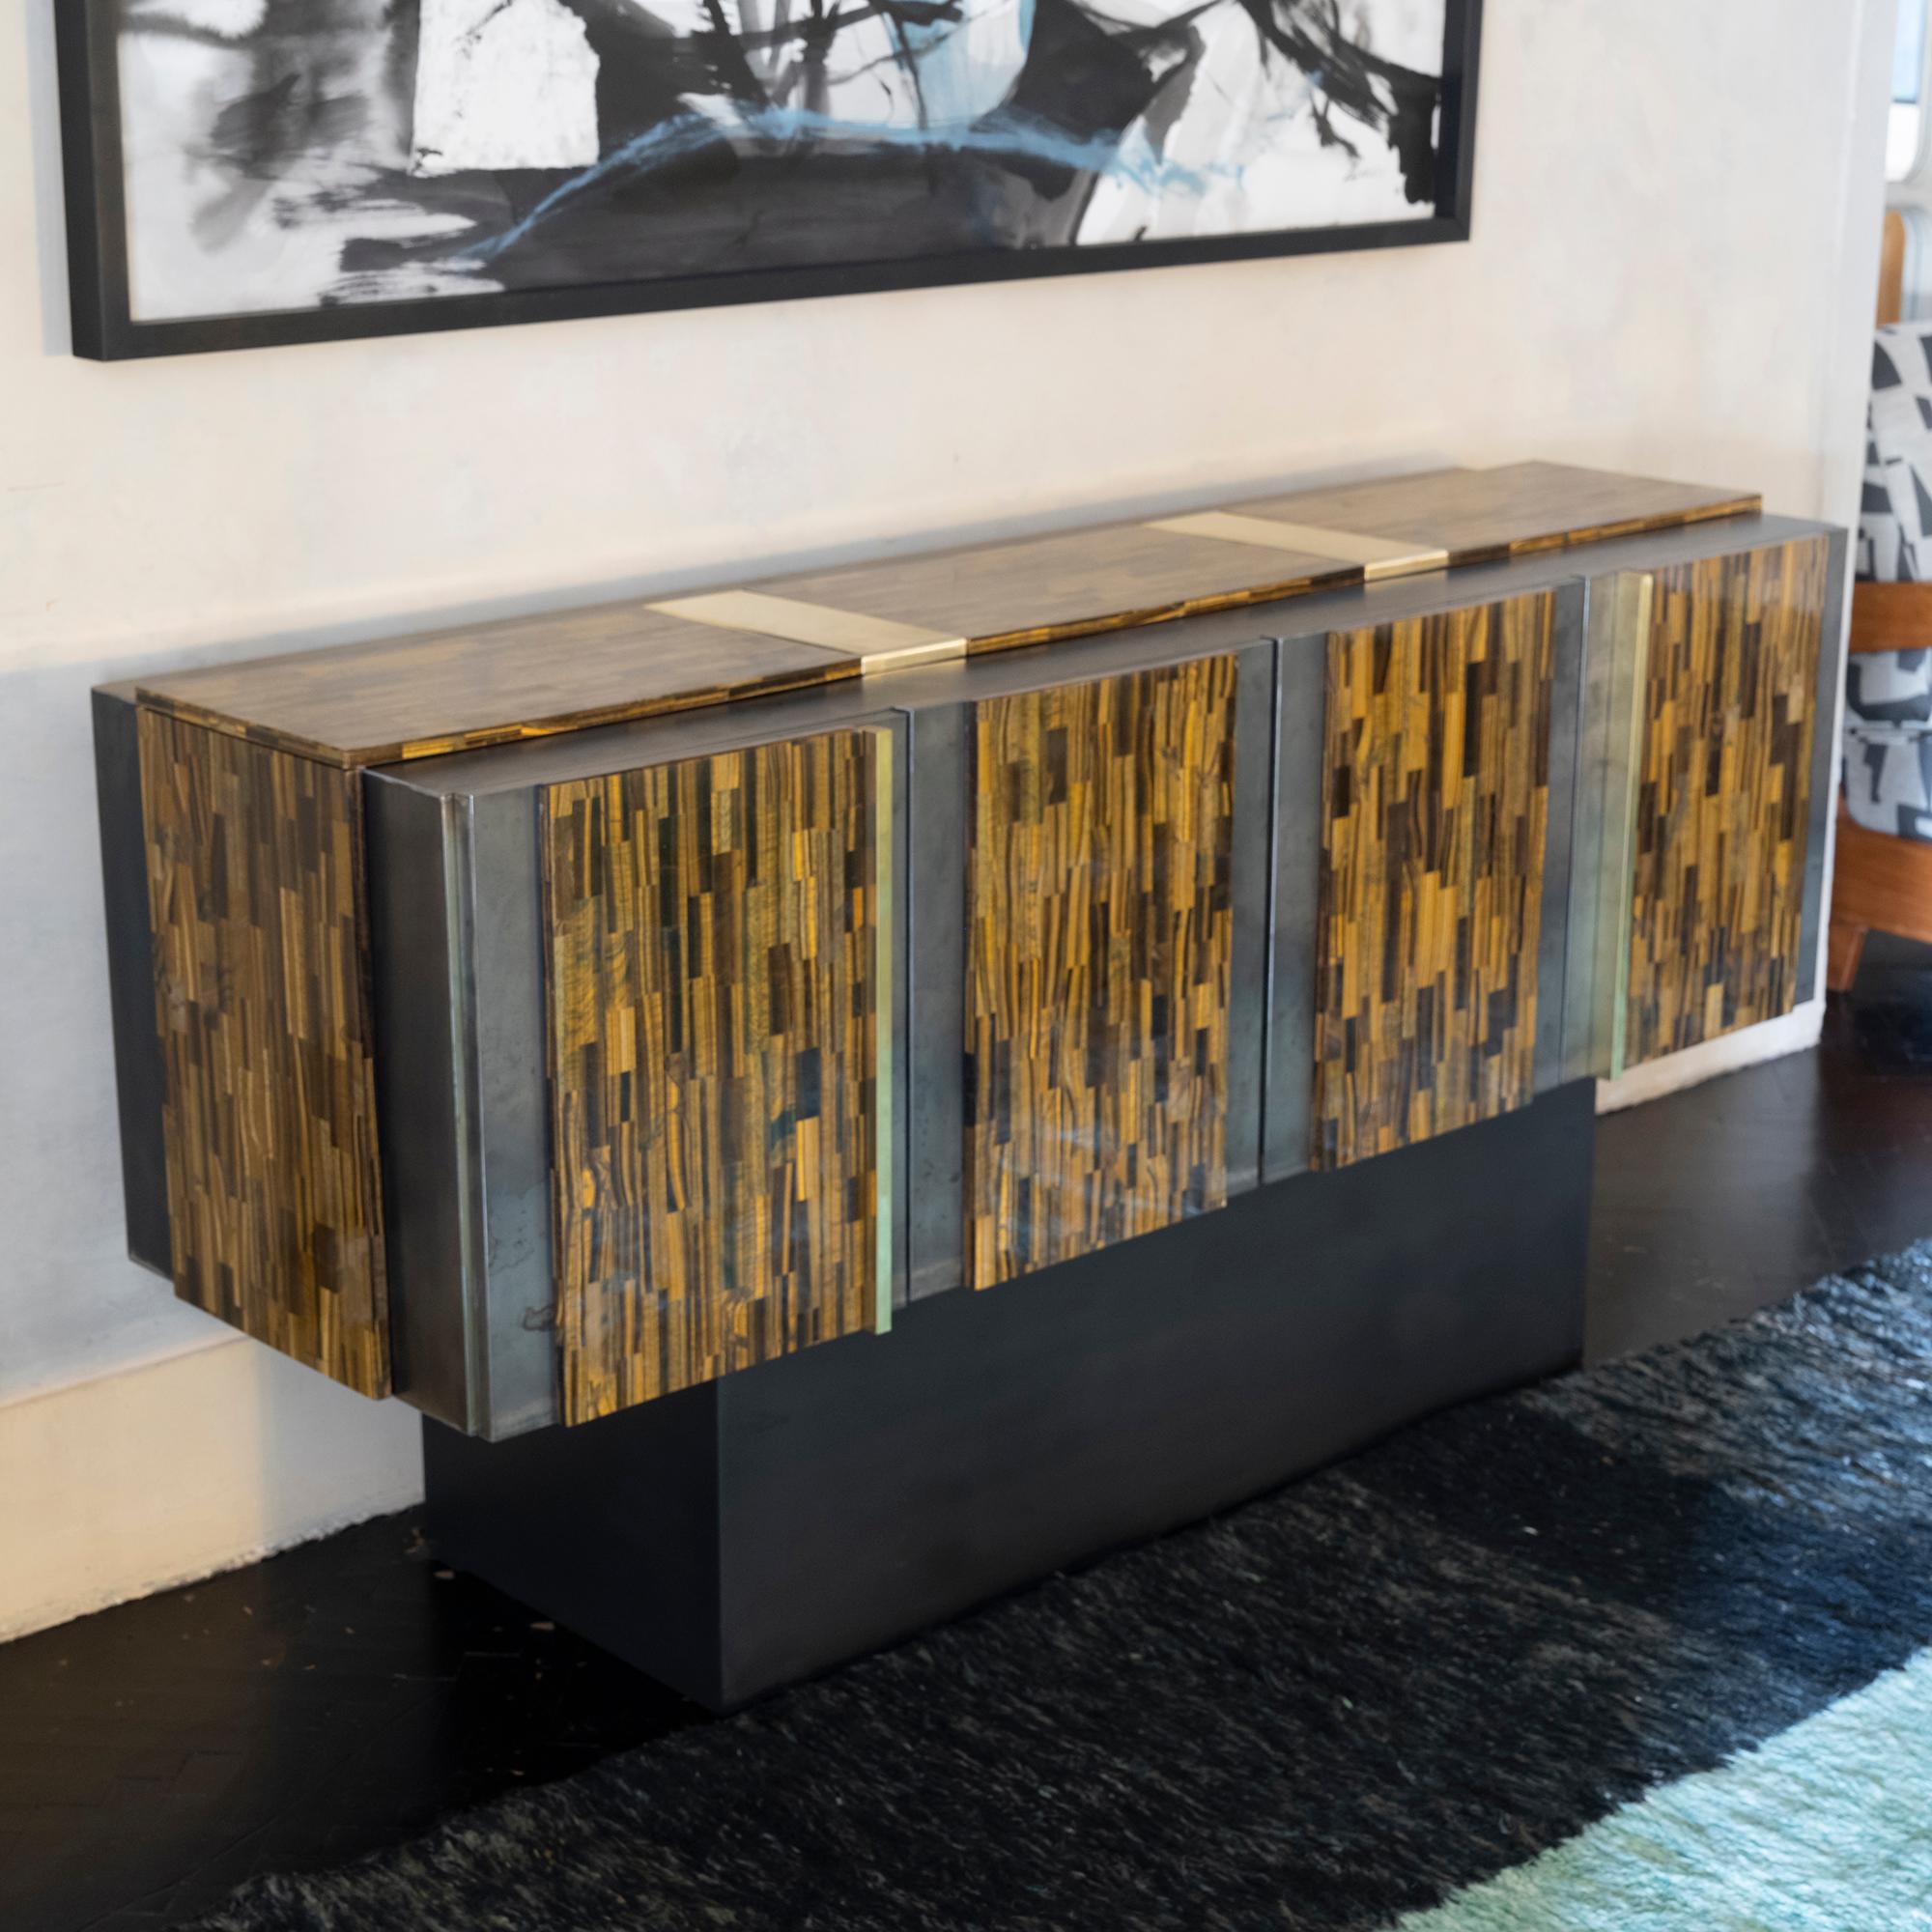 One of a kind sculptural sideboard realized by local workshop/artisans in solid wood covered all over in natural brut steel foil and decorative Golden Tiger Eye stone panels with natural brass details, interior lined in grey textured wood veneer and